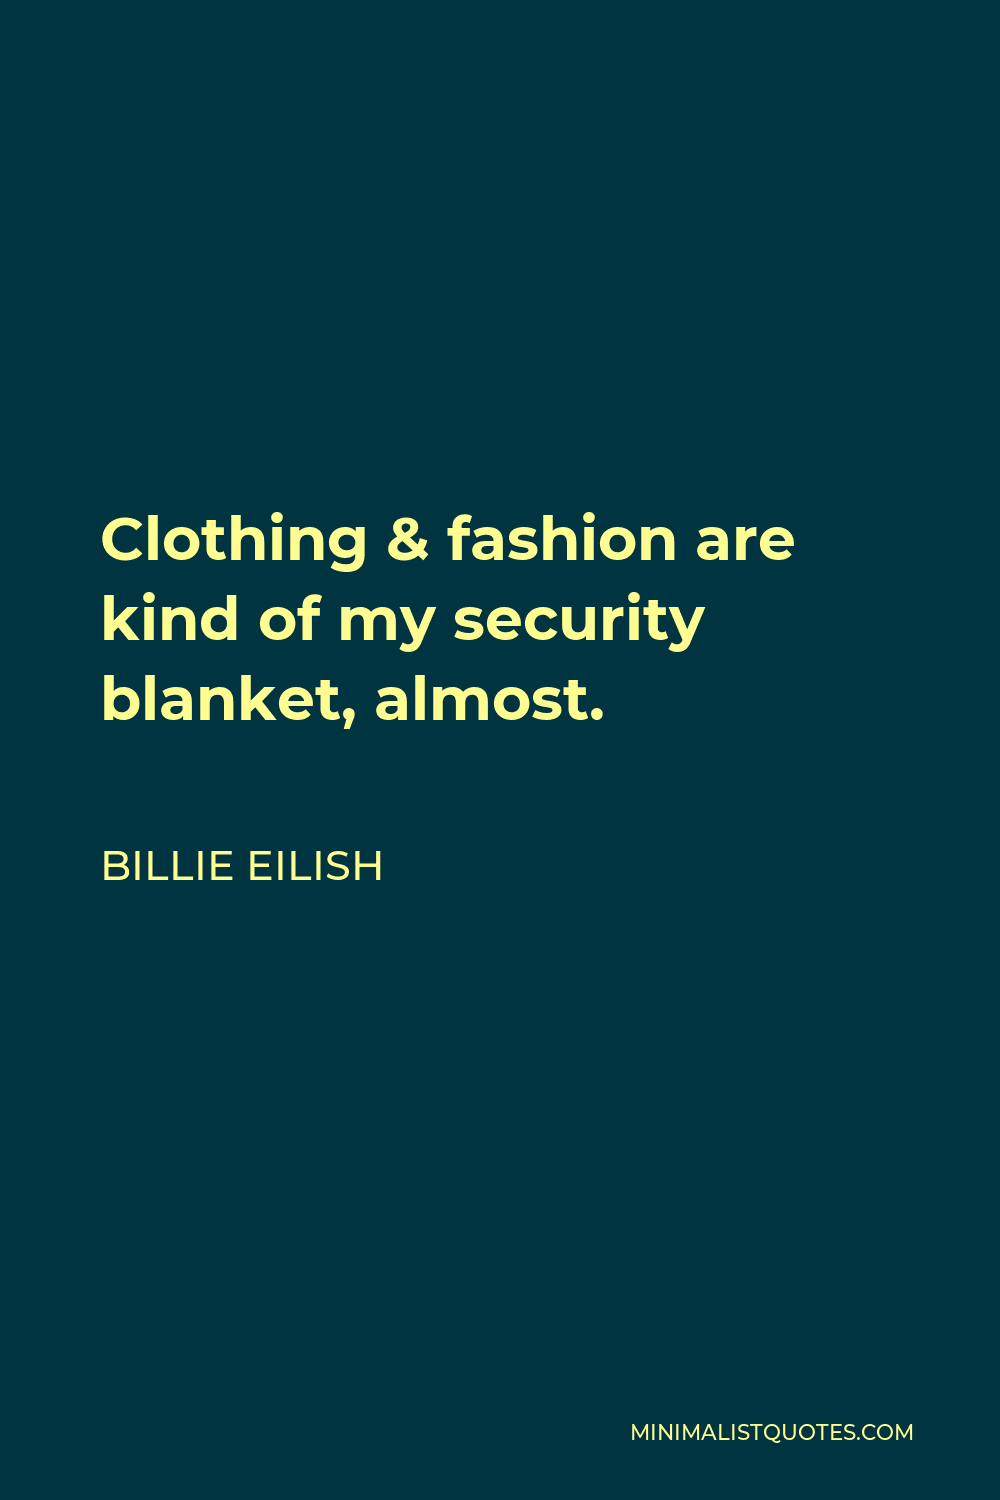 Billie Eilish Quote - Clothing & fashion are kind of my security blanket, almost.